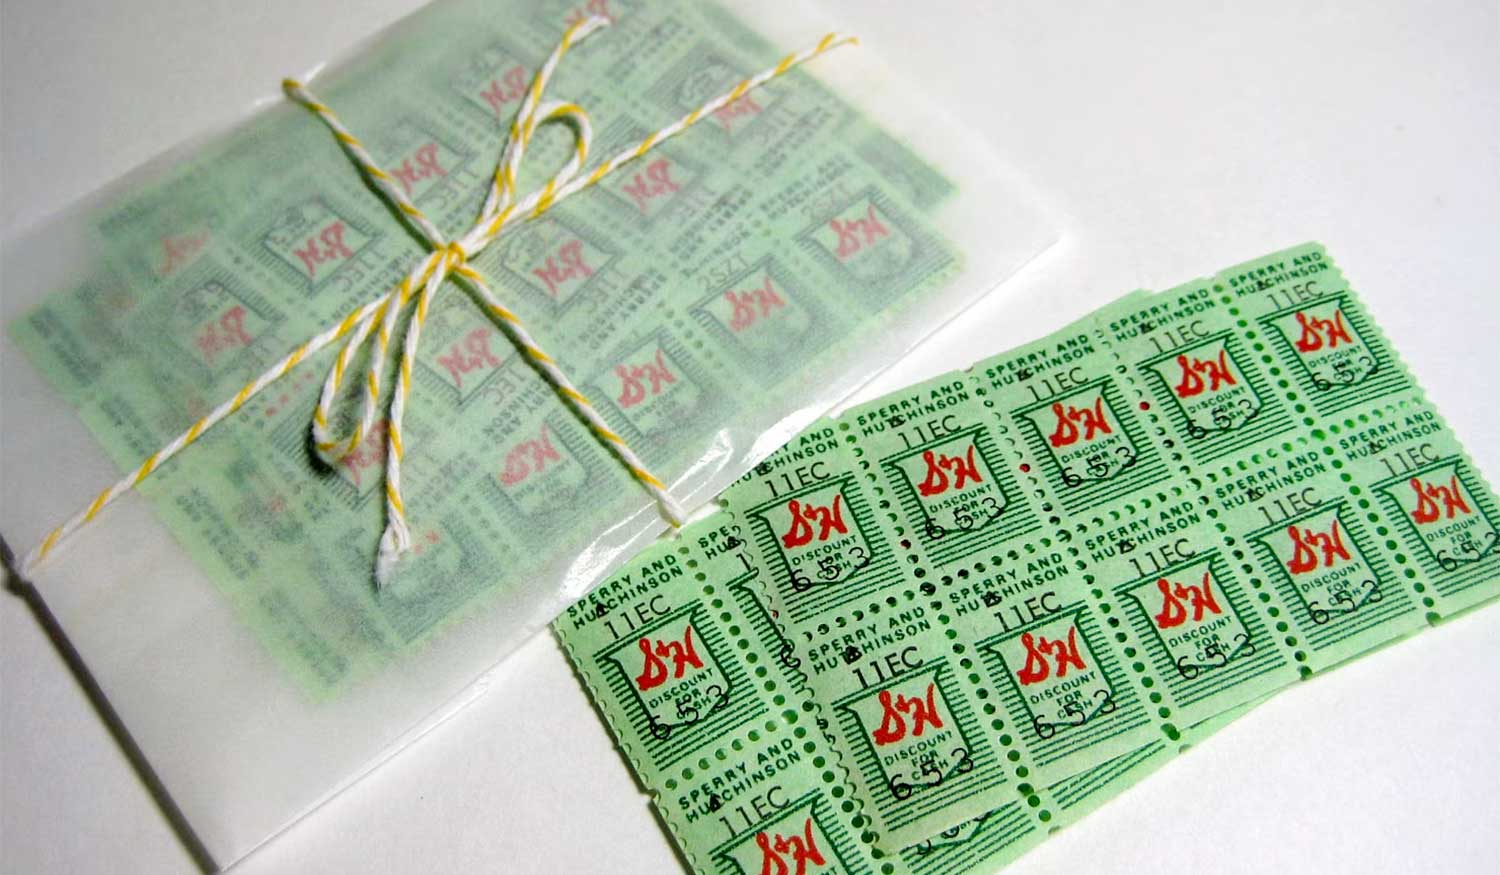 S&H Green Stamps, which were popular from 1930 through 1980 to encourage customer loyalty. Just as this currency of old had a redemption value, we too were in need of redemption. Enter Jesus.